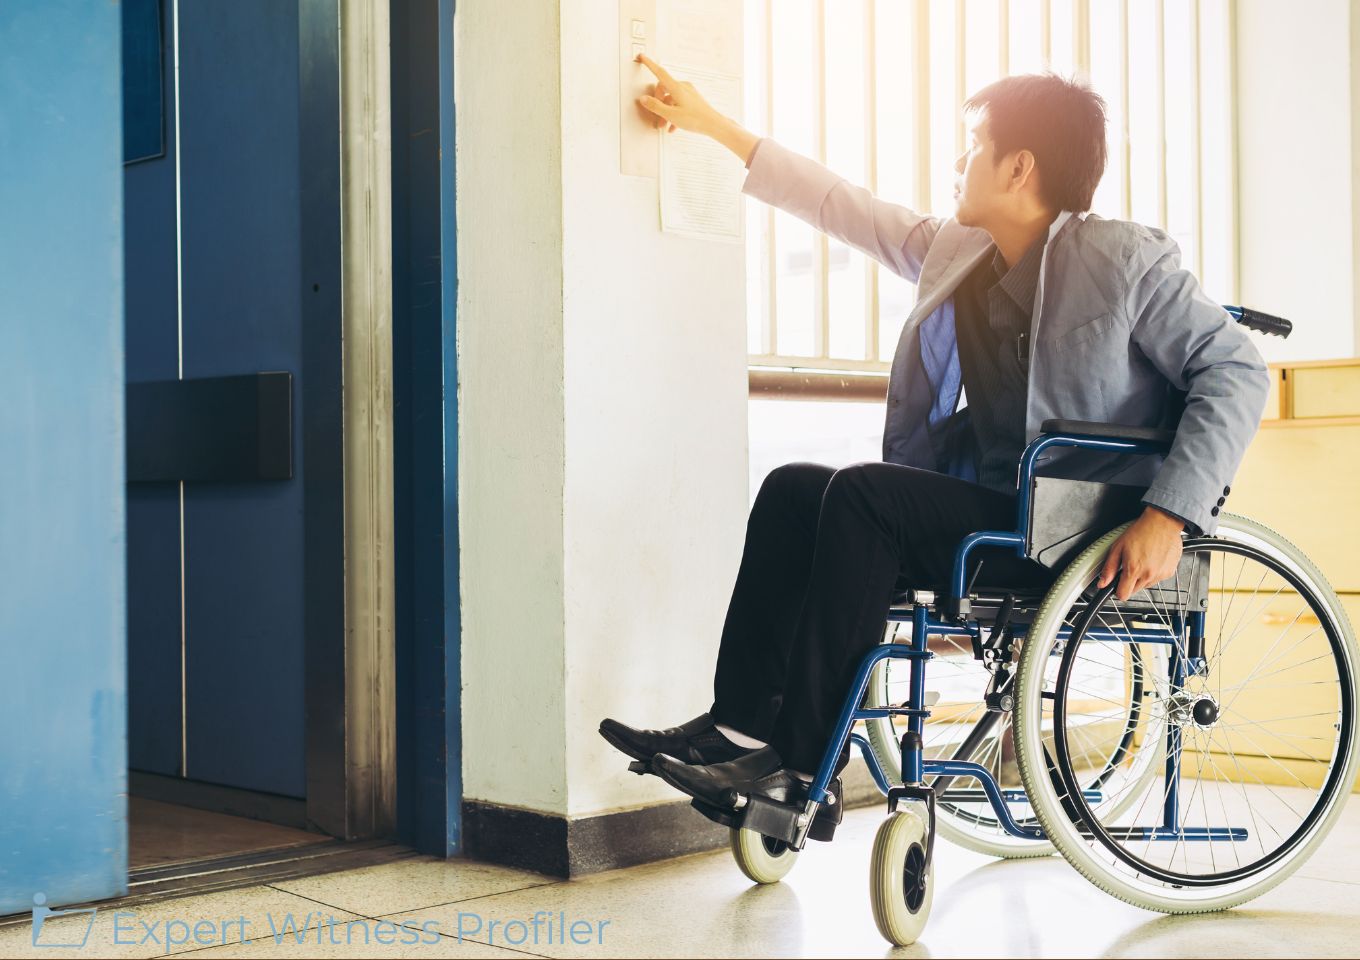 Court validates the objective findings of the statistics expert witness in this class action lawsuit consisting of disability discrimination claims